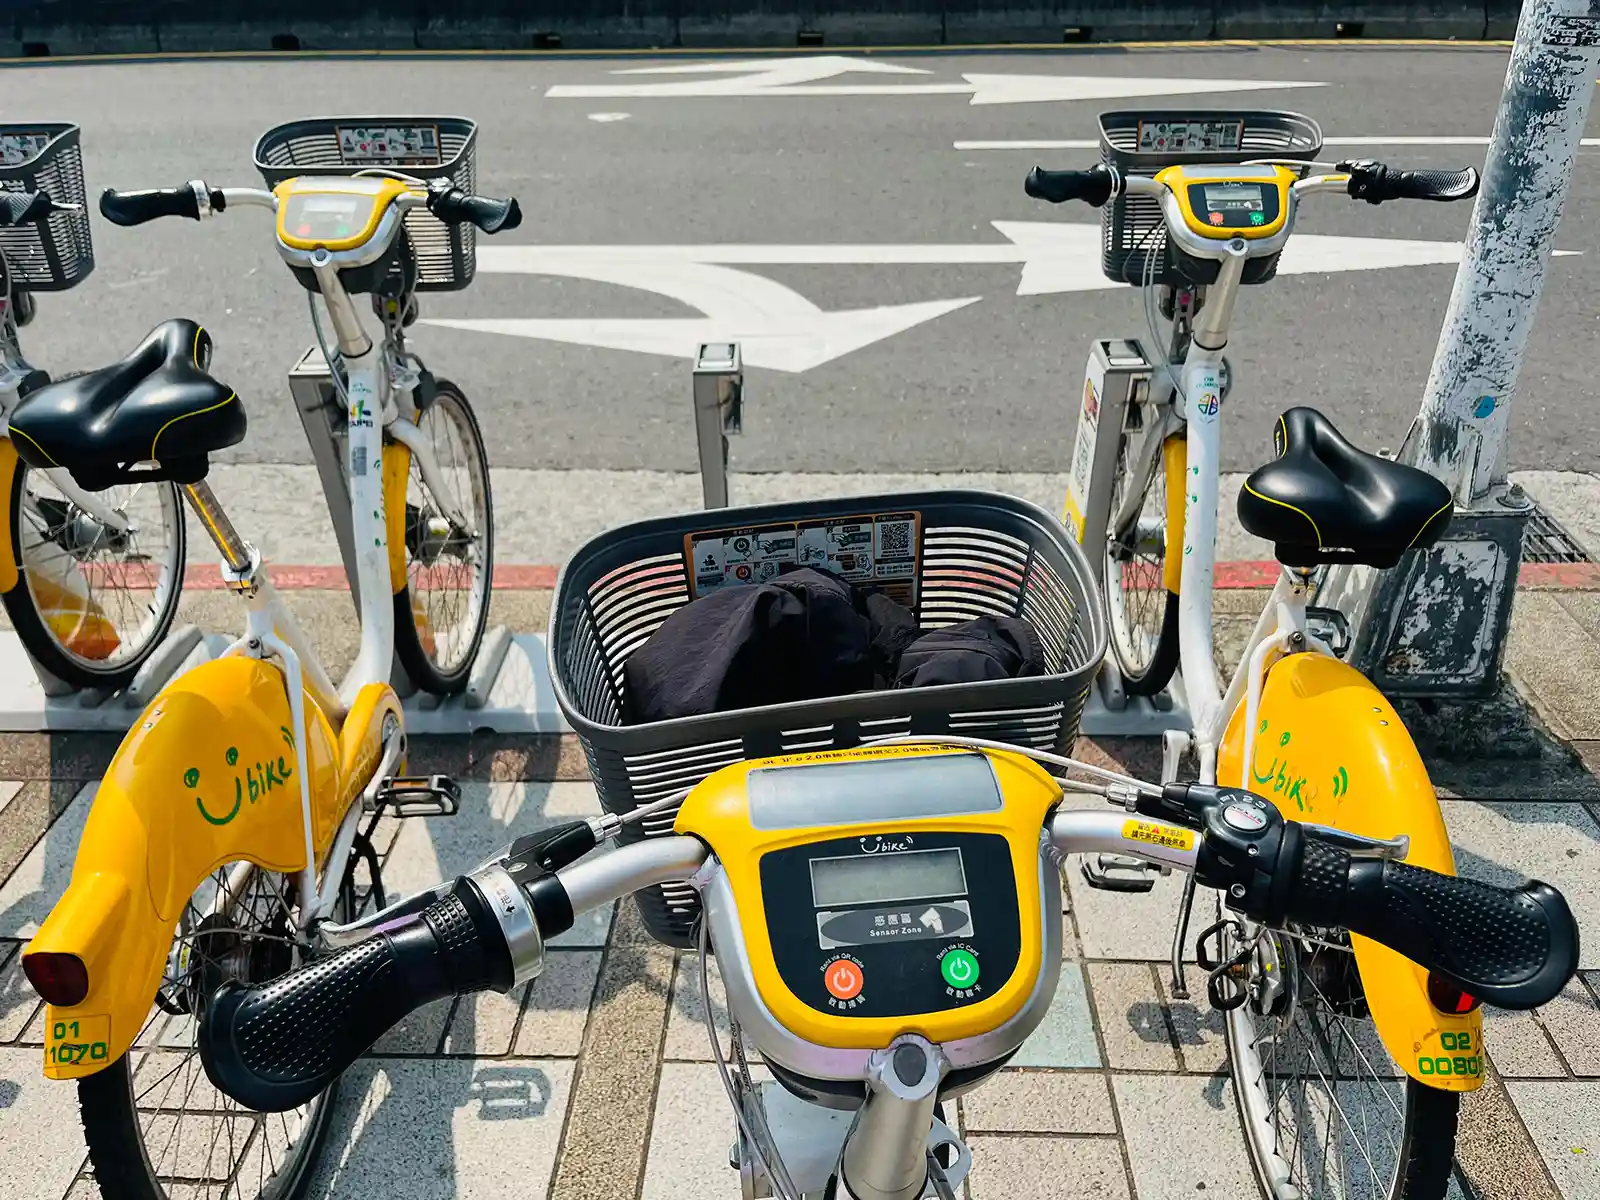 Close-up view of a docking station for a public bike-sharing system.